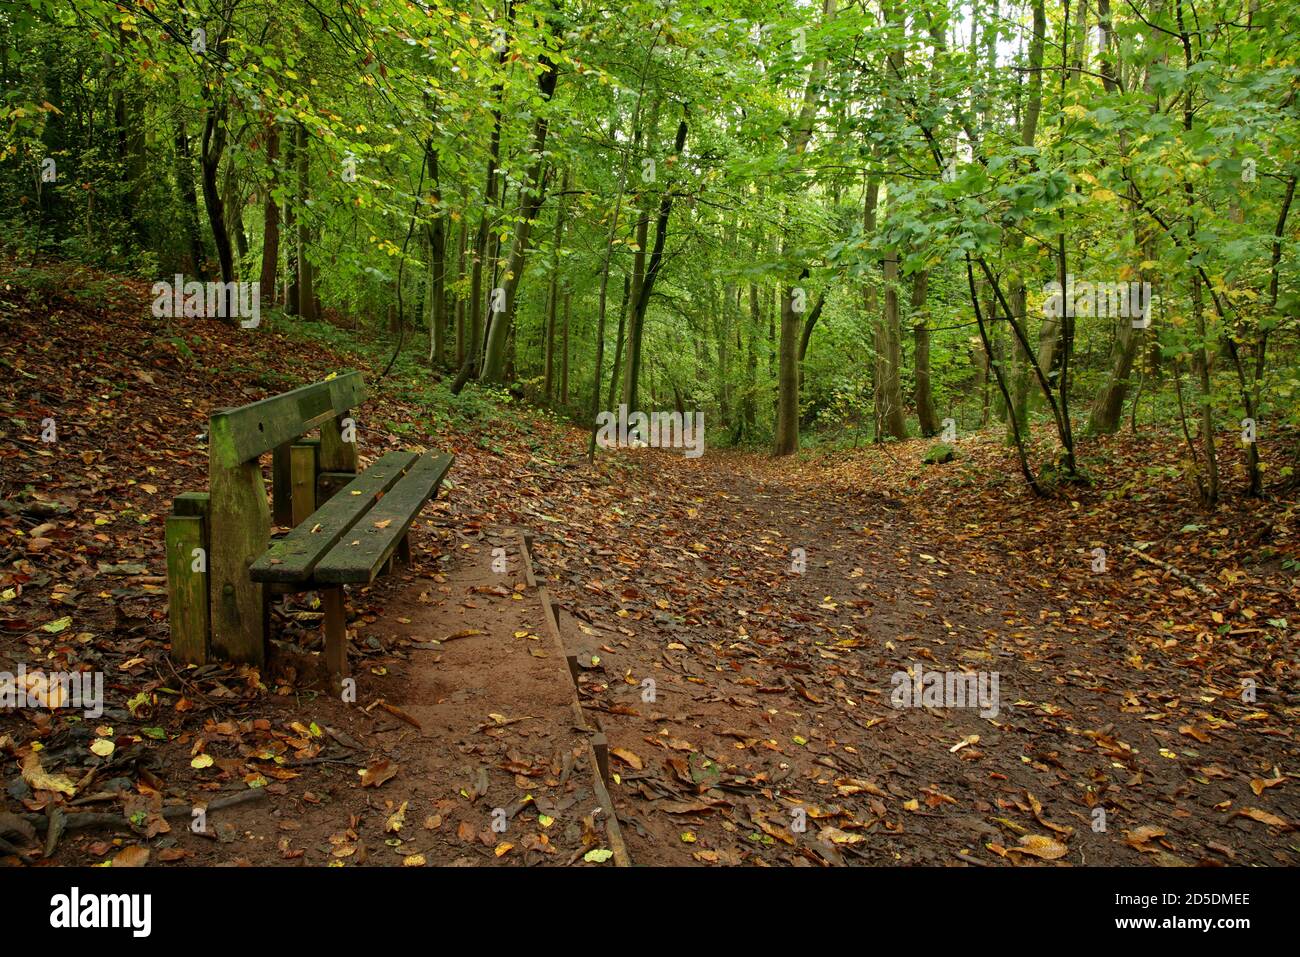 Public footpath in the woods on Kinver edge, Staffordshire, England, UK. Stock Photo